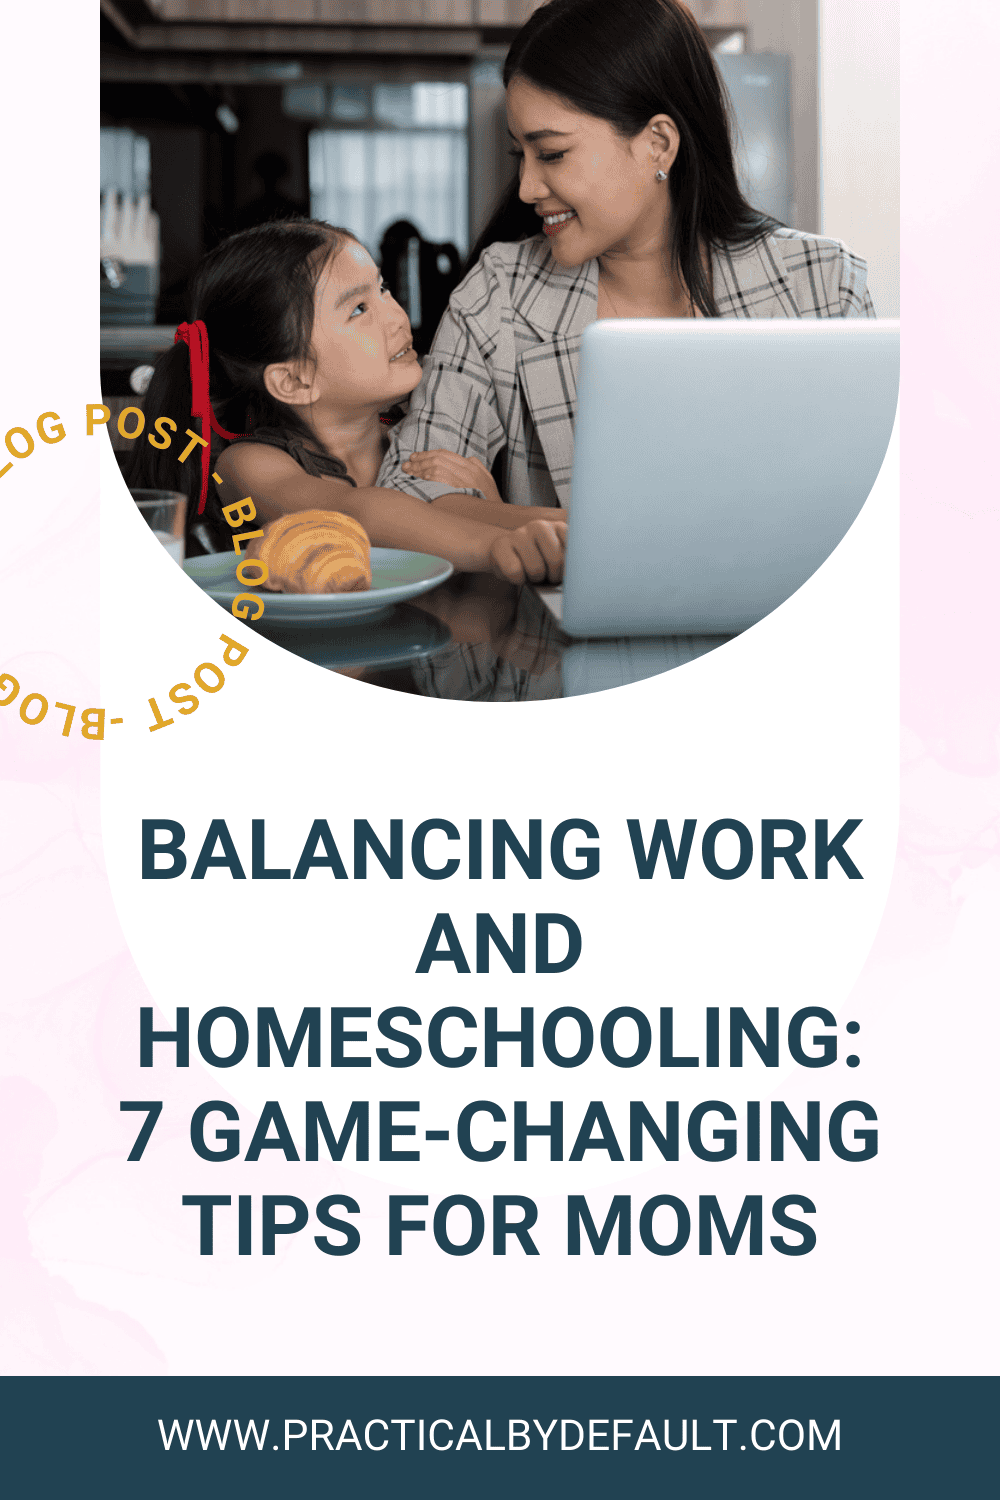 mom sitting with a child working on a computer. Text says new blog post balancing work and homeschooling